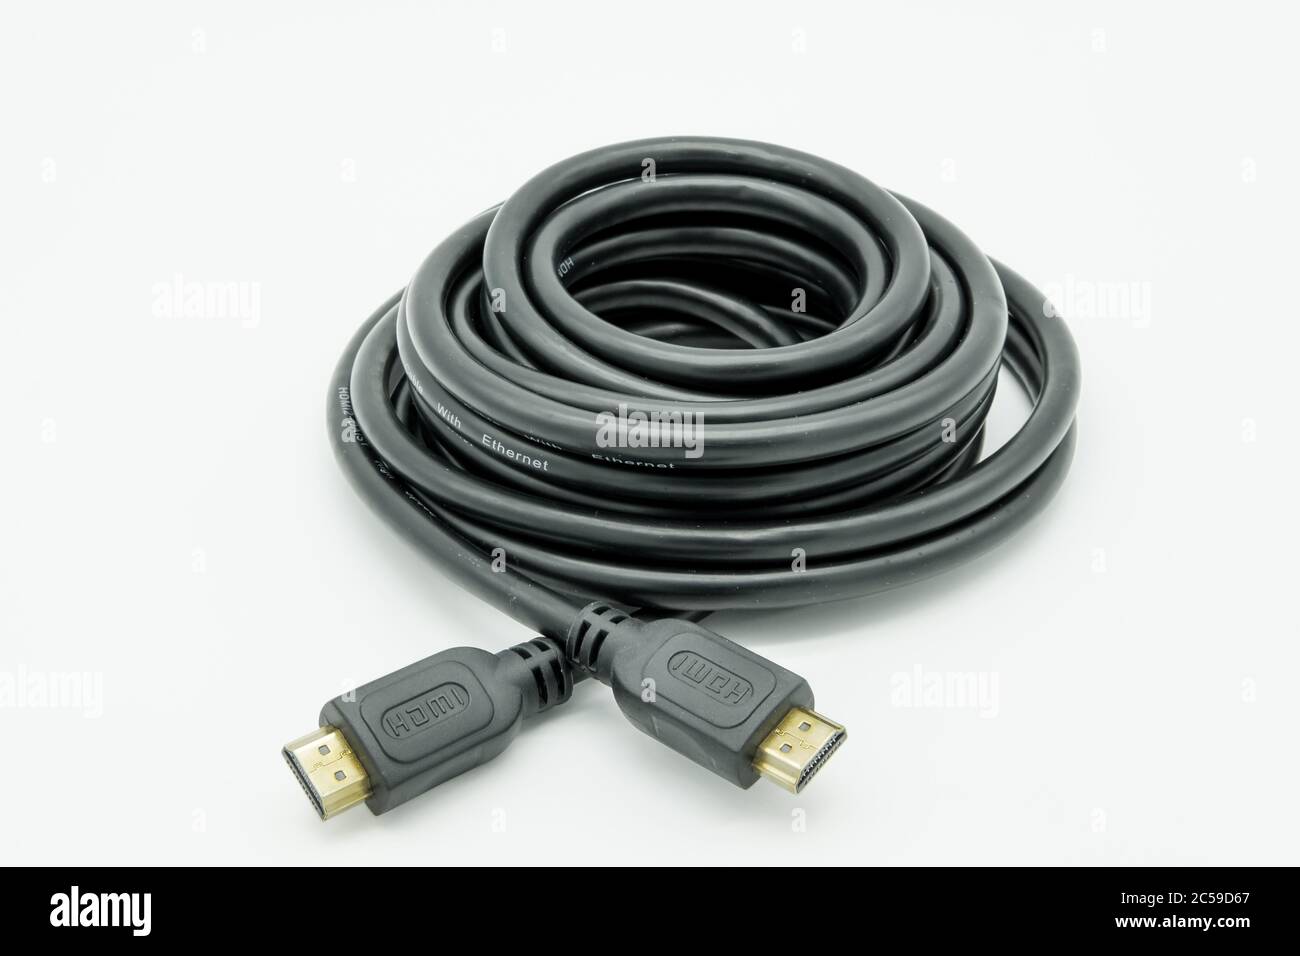 Isolated image of a new generation of HDMI to HDMI 4K TV connection cables  used to connect to consoles, set top boxes and BlueRay players Stock Photo  - Alamy